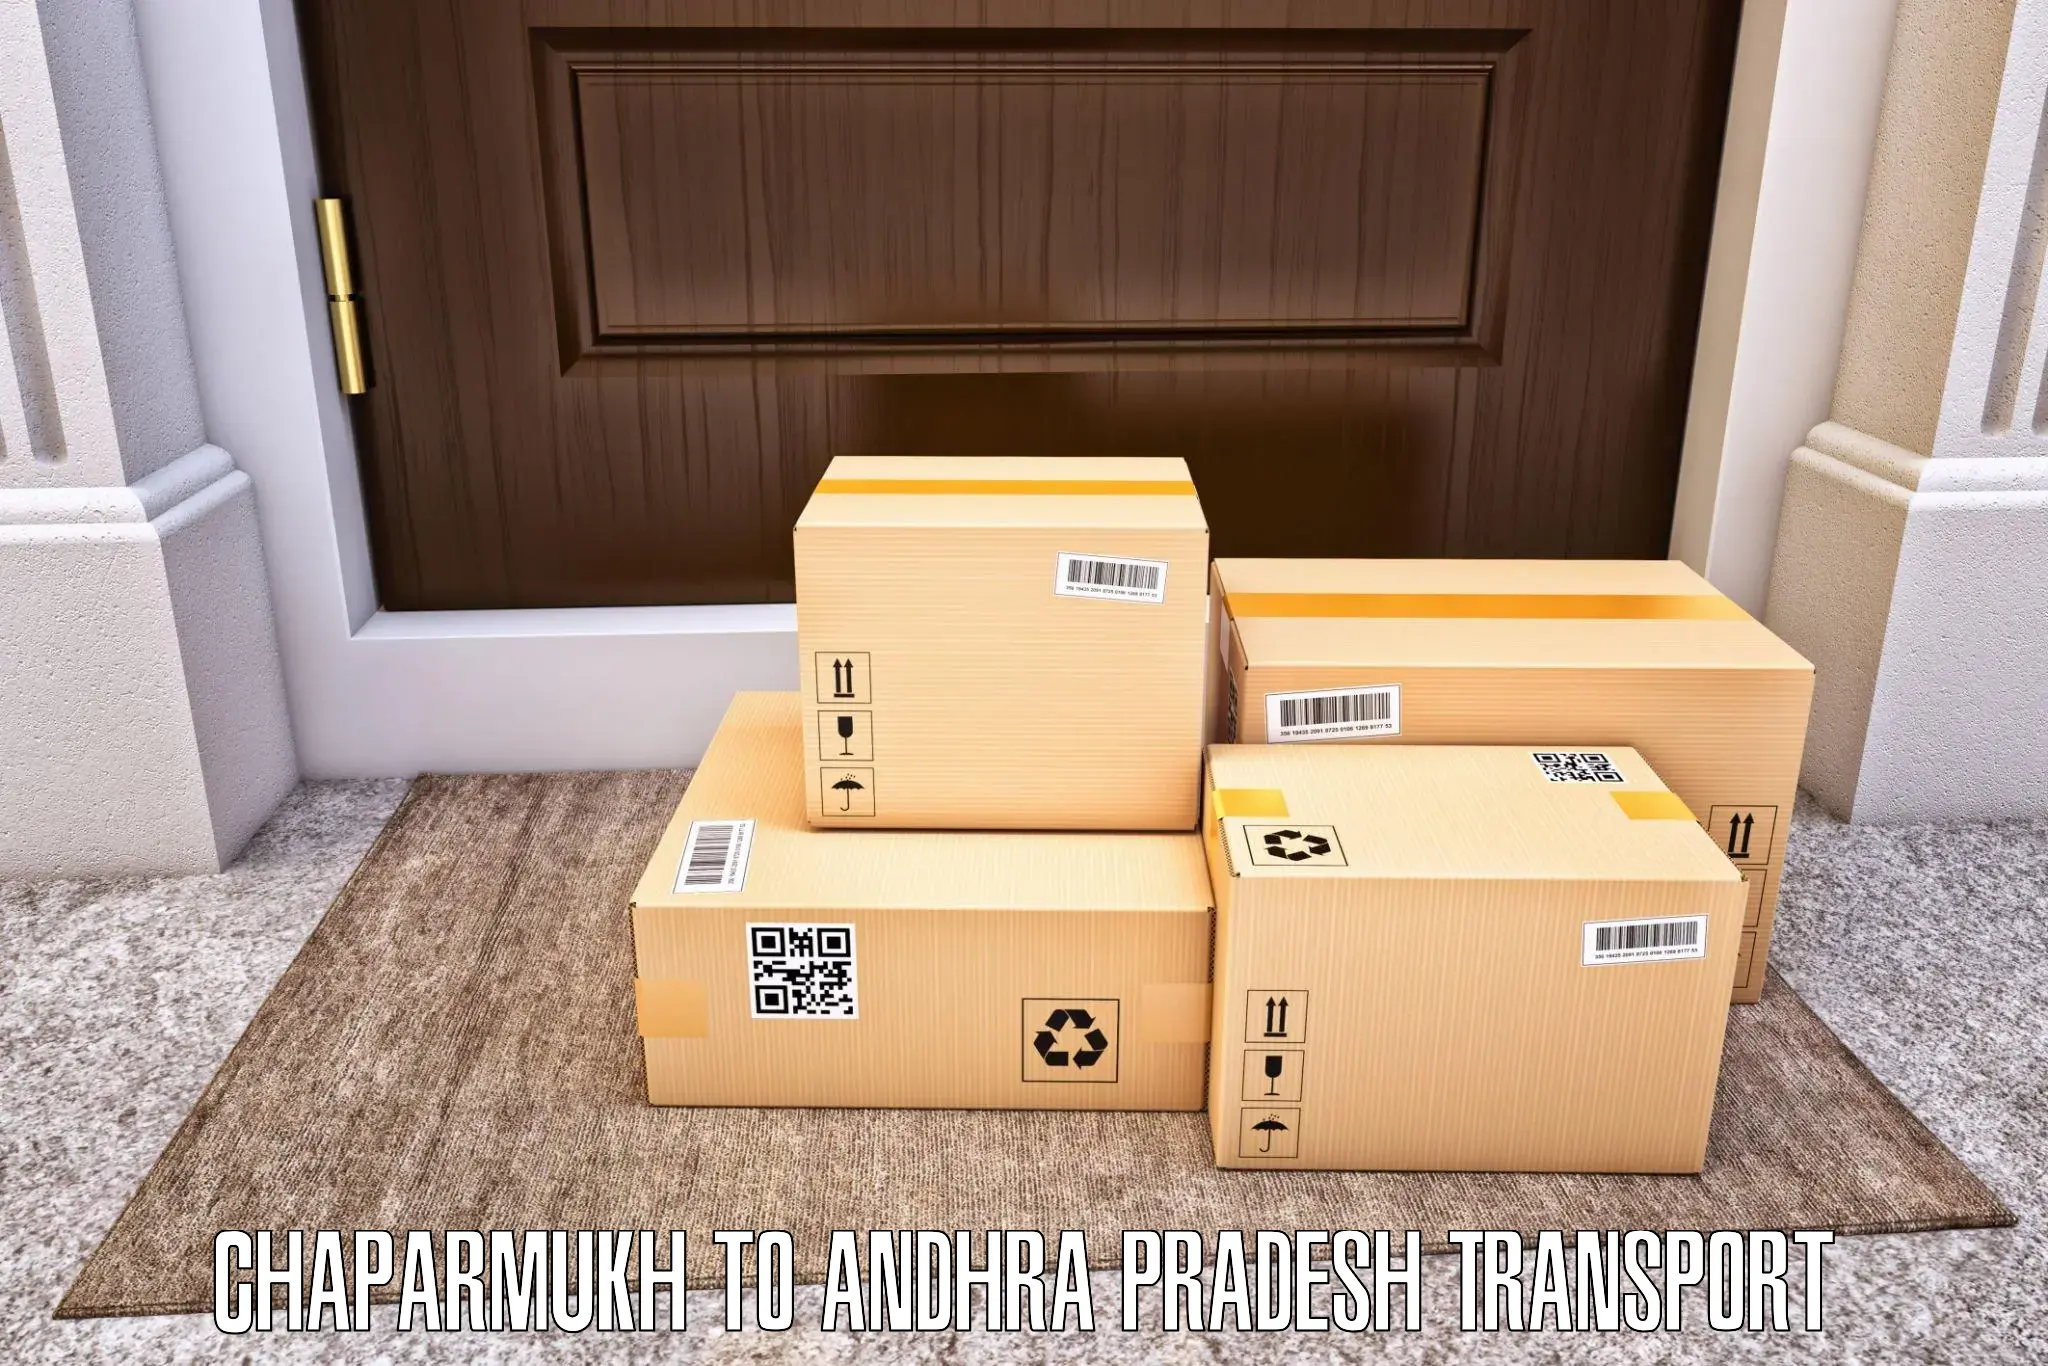 Goods transport services Chaparmukh to Tuni